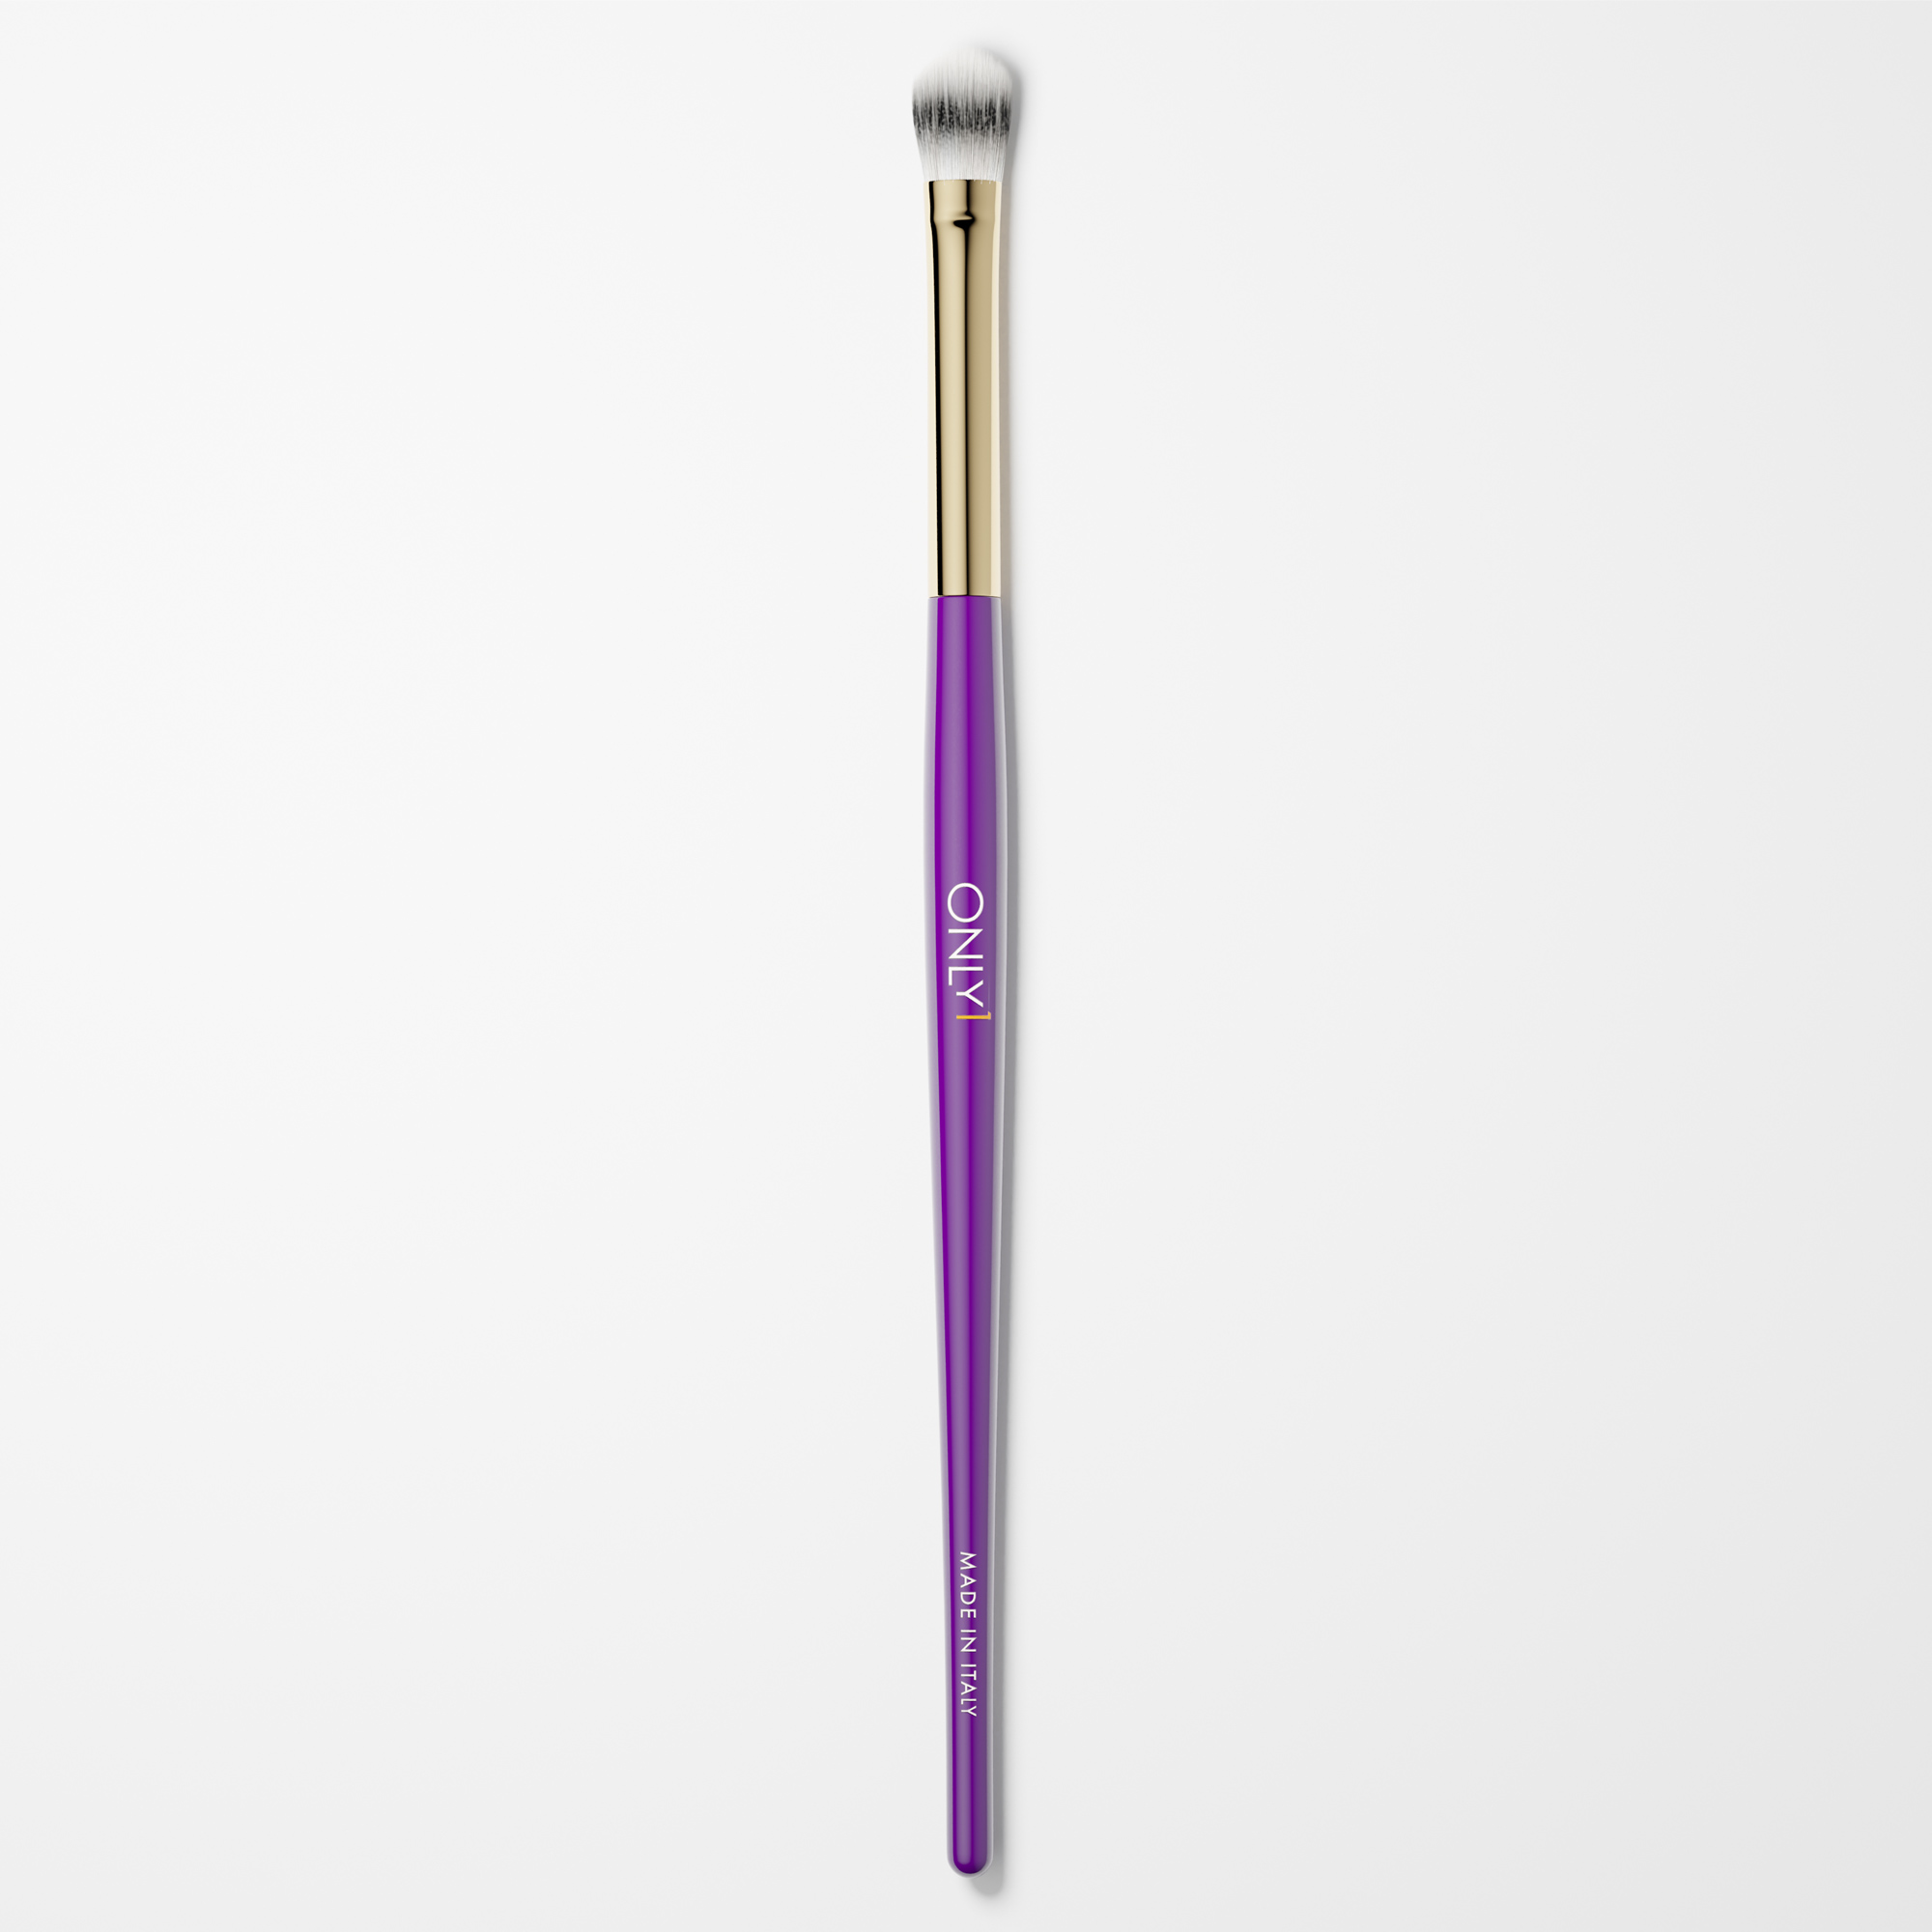 Purple and gold makeup brush with white bristles on a plain white background.